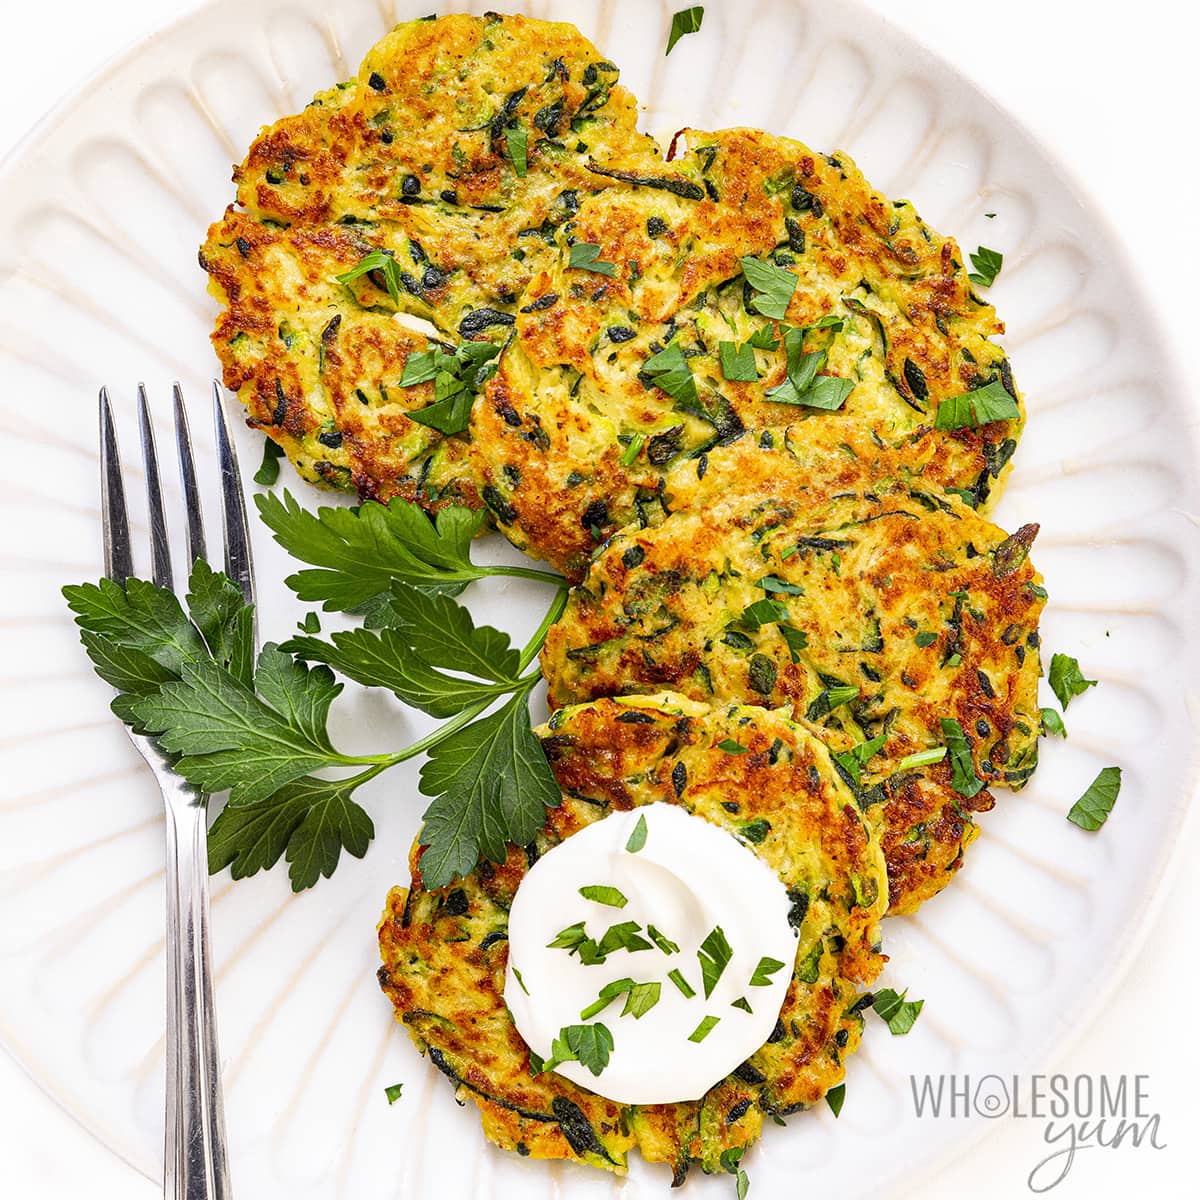 Finished zucchini fritters recipe layered on a plate with a fork.